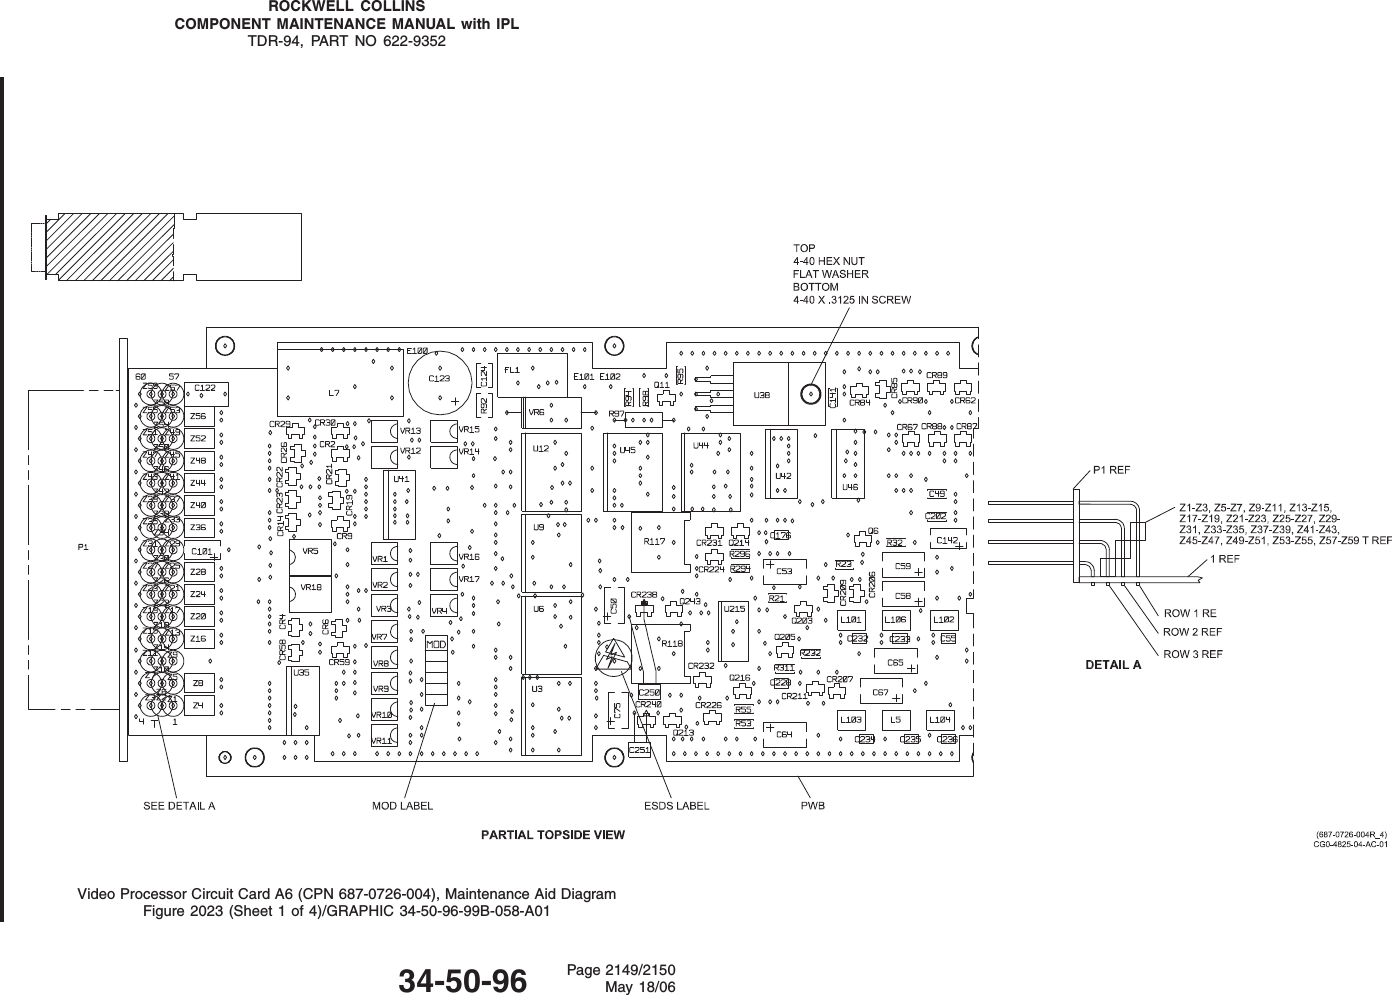 ROCKWELL COLLINSCOMPONENT MAINTENANCE MANUAL with IPLTDR-94, PART NO 622-9352Video Processor Circuit Card A6 (CPN 687-0726-004), Maintenance Aid DiagramFigure 2023 (Sheet 1 of 4)/GRAPHIC 34-50-96-99B-058-A0134-50-96 Page 2149/2150May 18/06